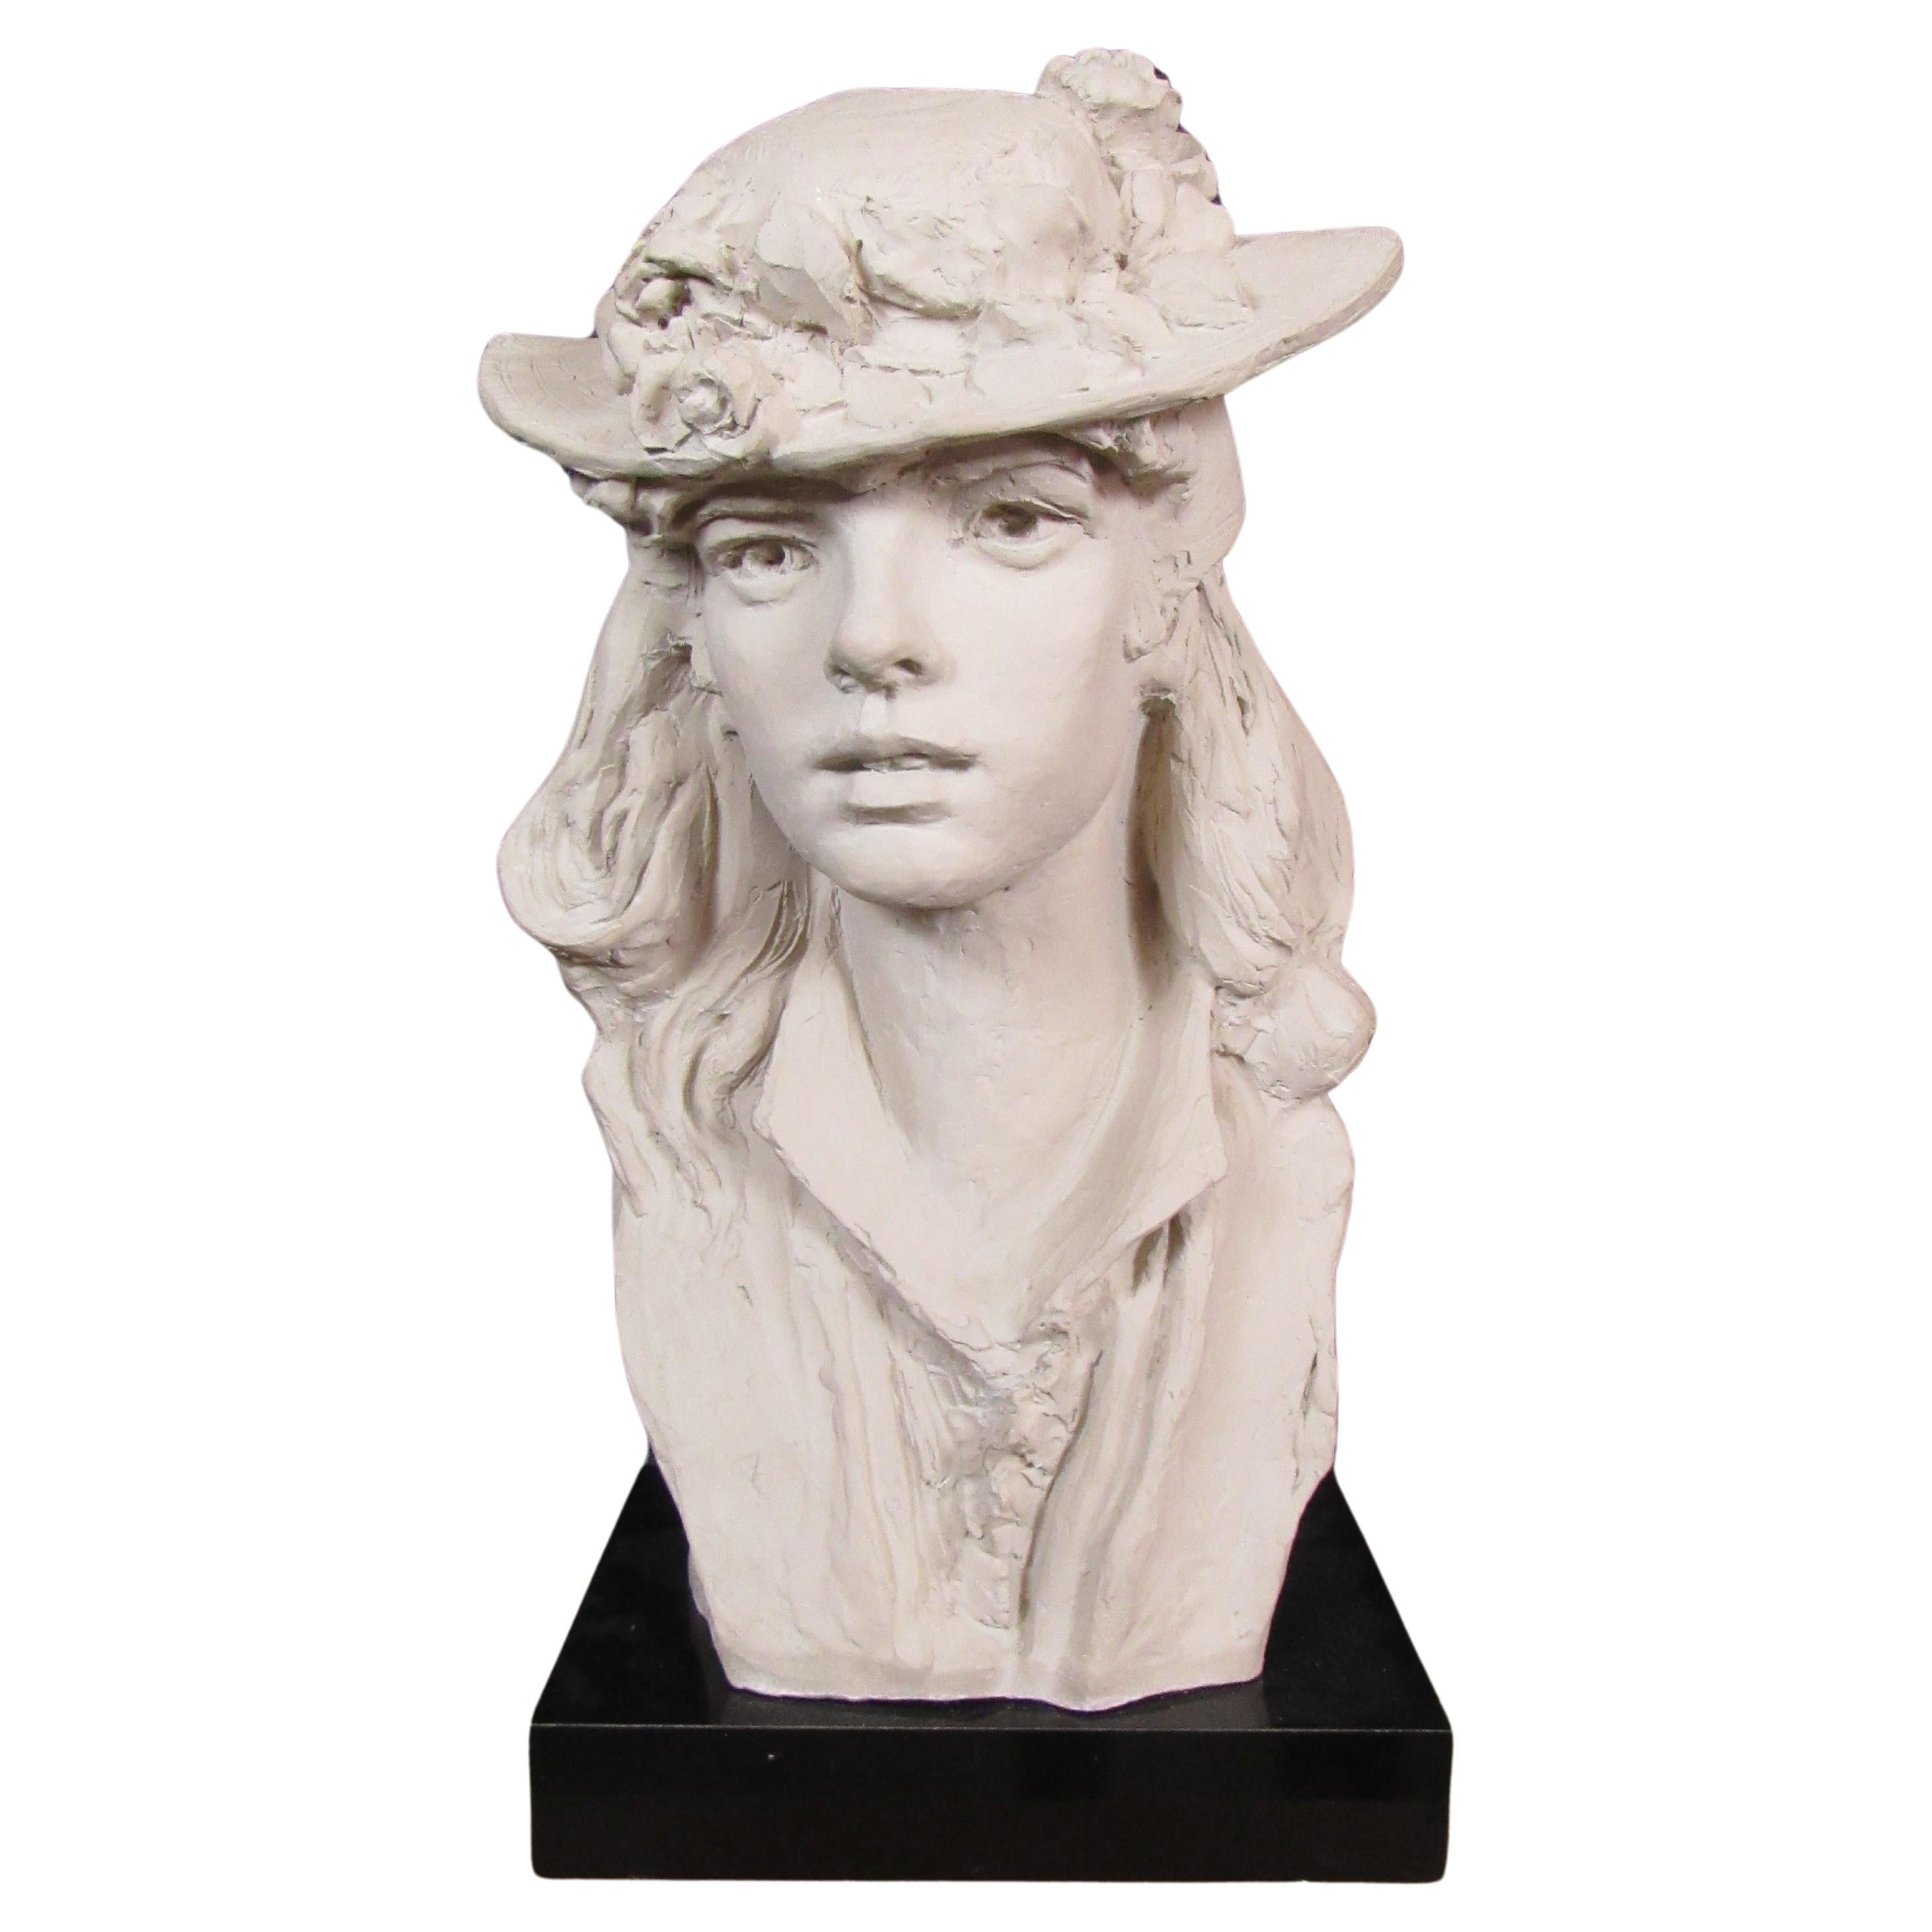 "Young Girl With Roses on Her Hat" by Austin Productions after A. Rodin (1979)